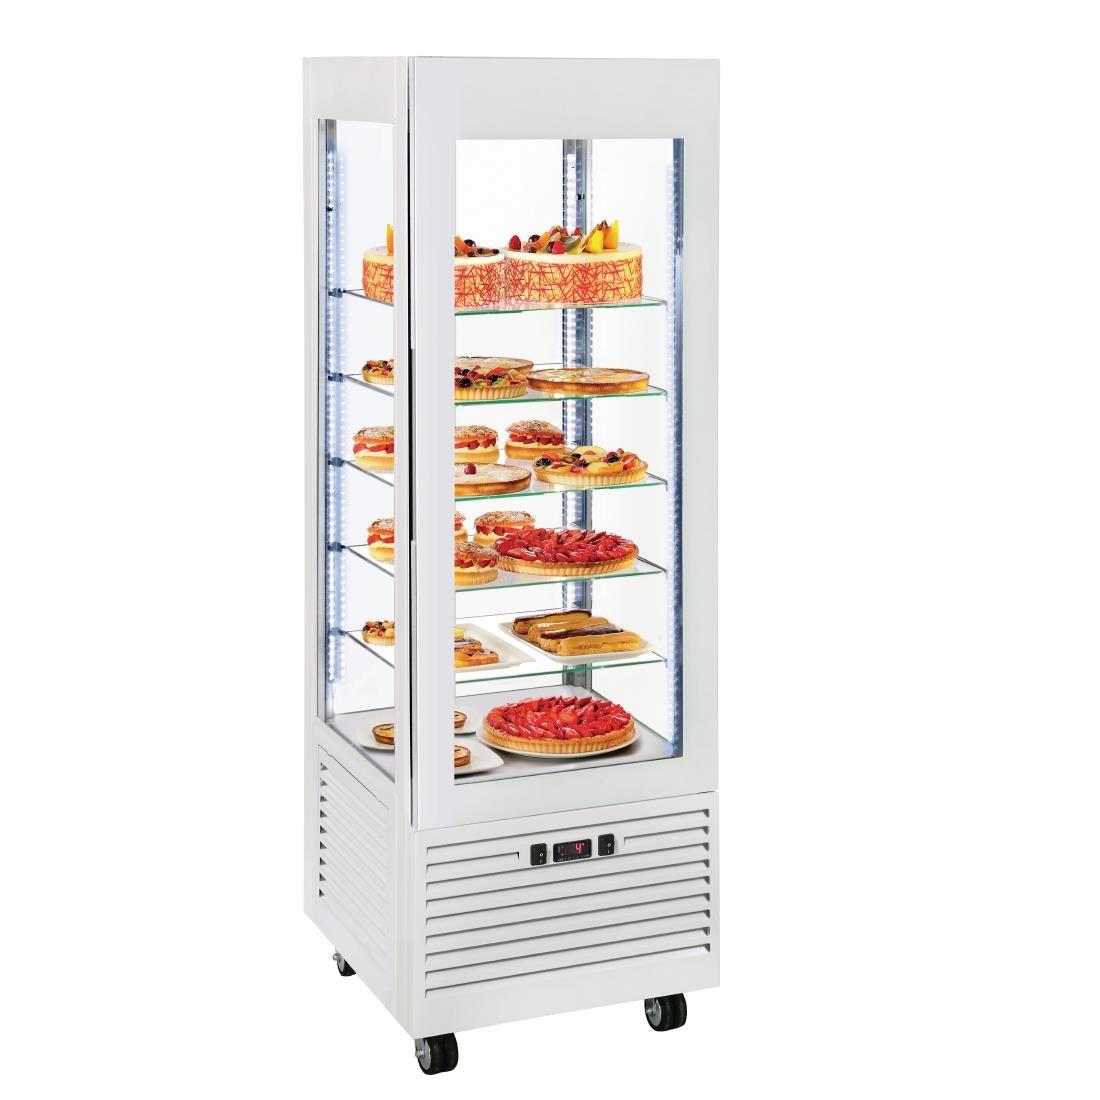 Roller Grill Display Fridge with Fixed Shelves White - DT735  - 1